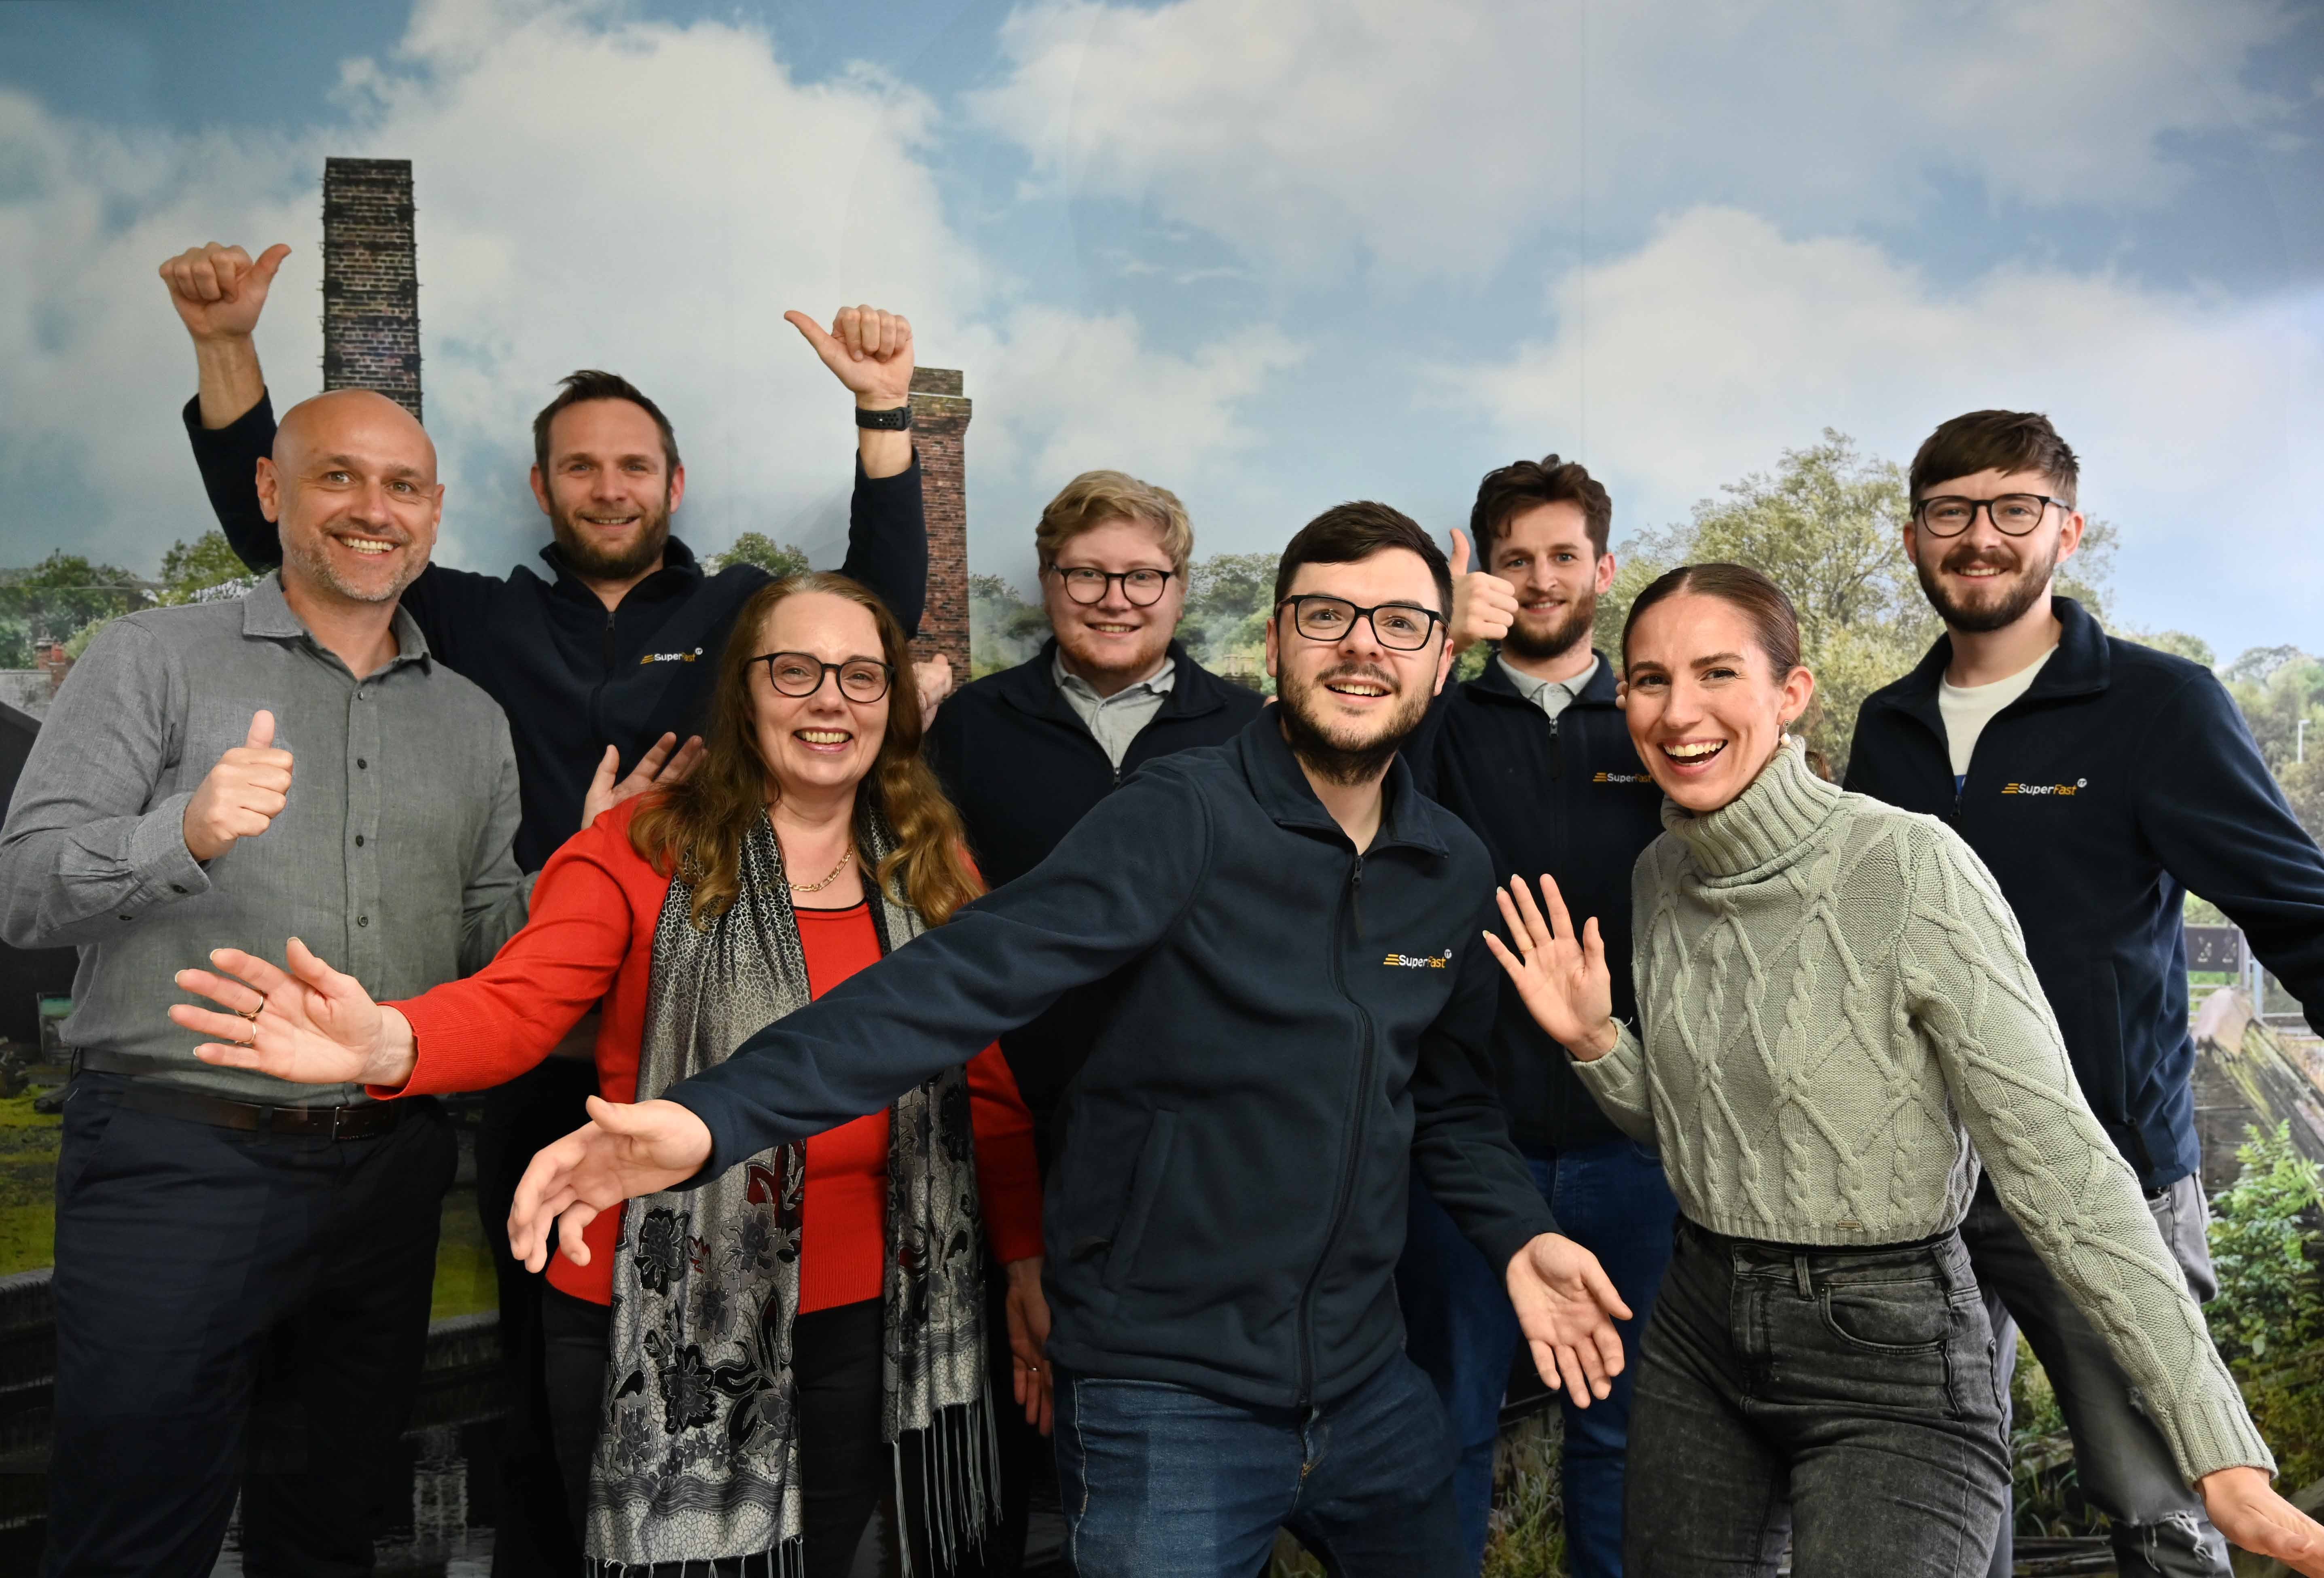 The Superfast IT team - IT company proves small businesses can help employees ‘Thrive at Work’ through wellbeing accreditation - Low res web ready